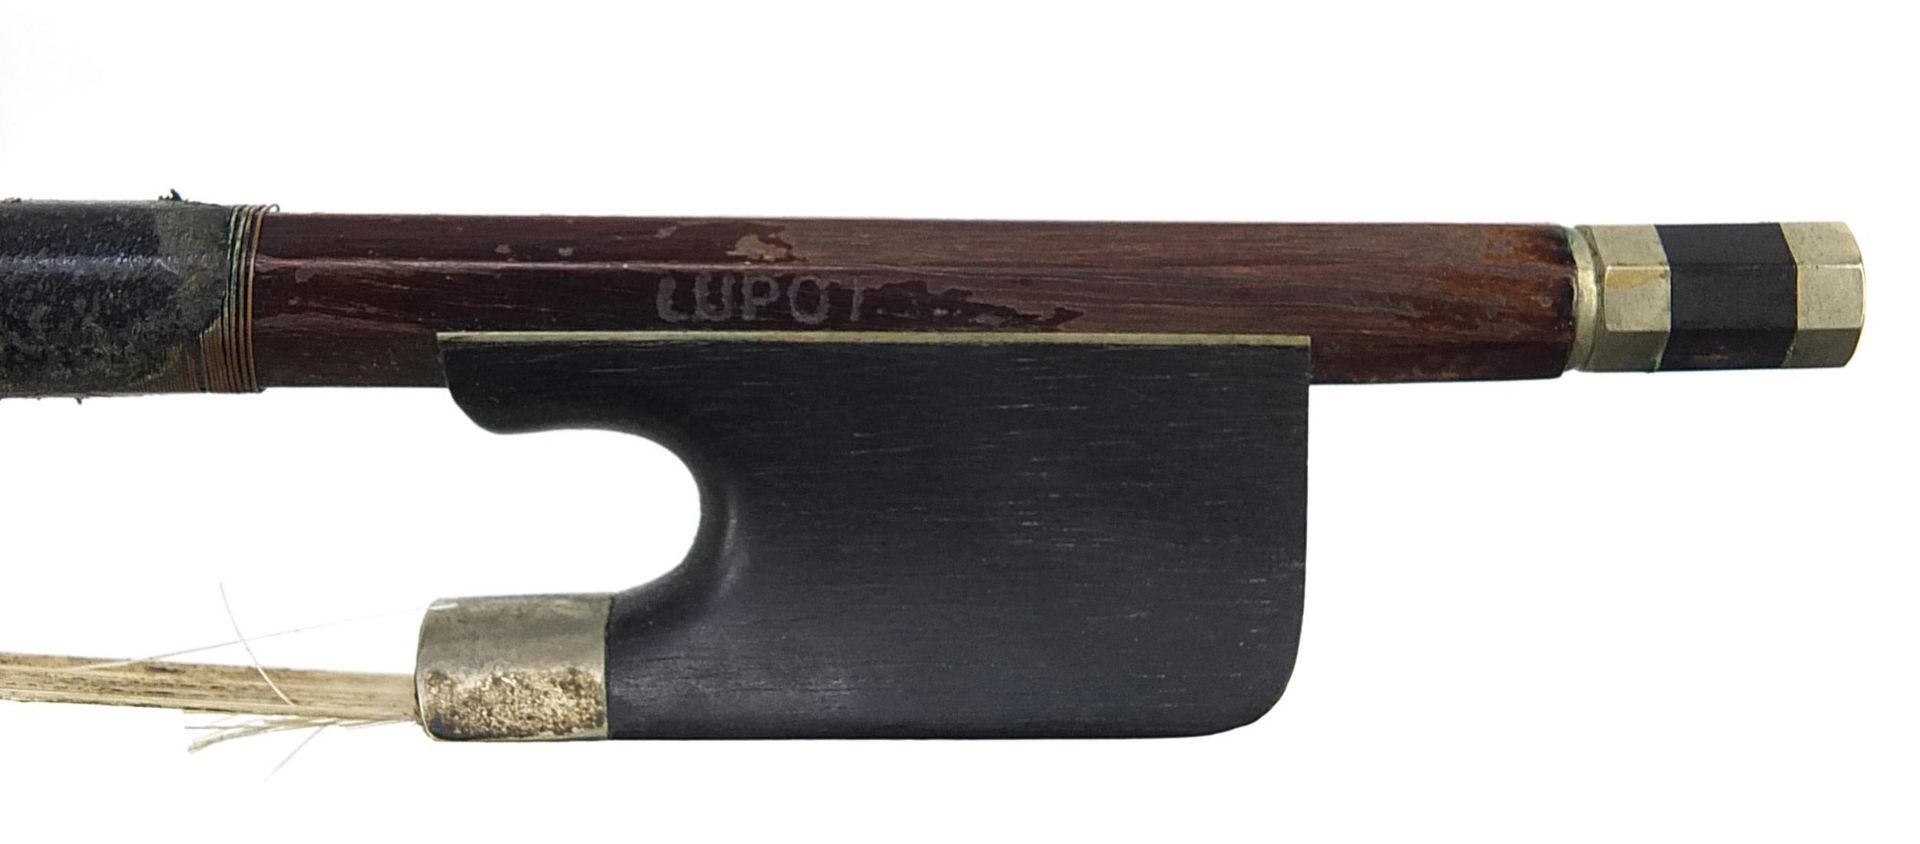 Old wooden violin bearing a Stradivarius label and violin bow impressed Lupot with case, the - Image 4 of 7